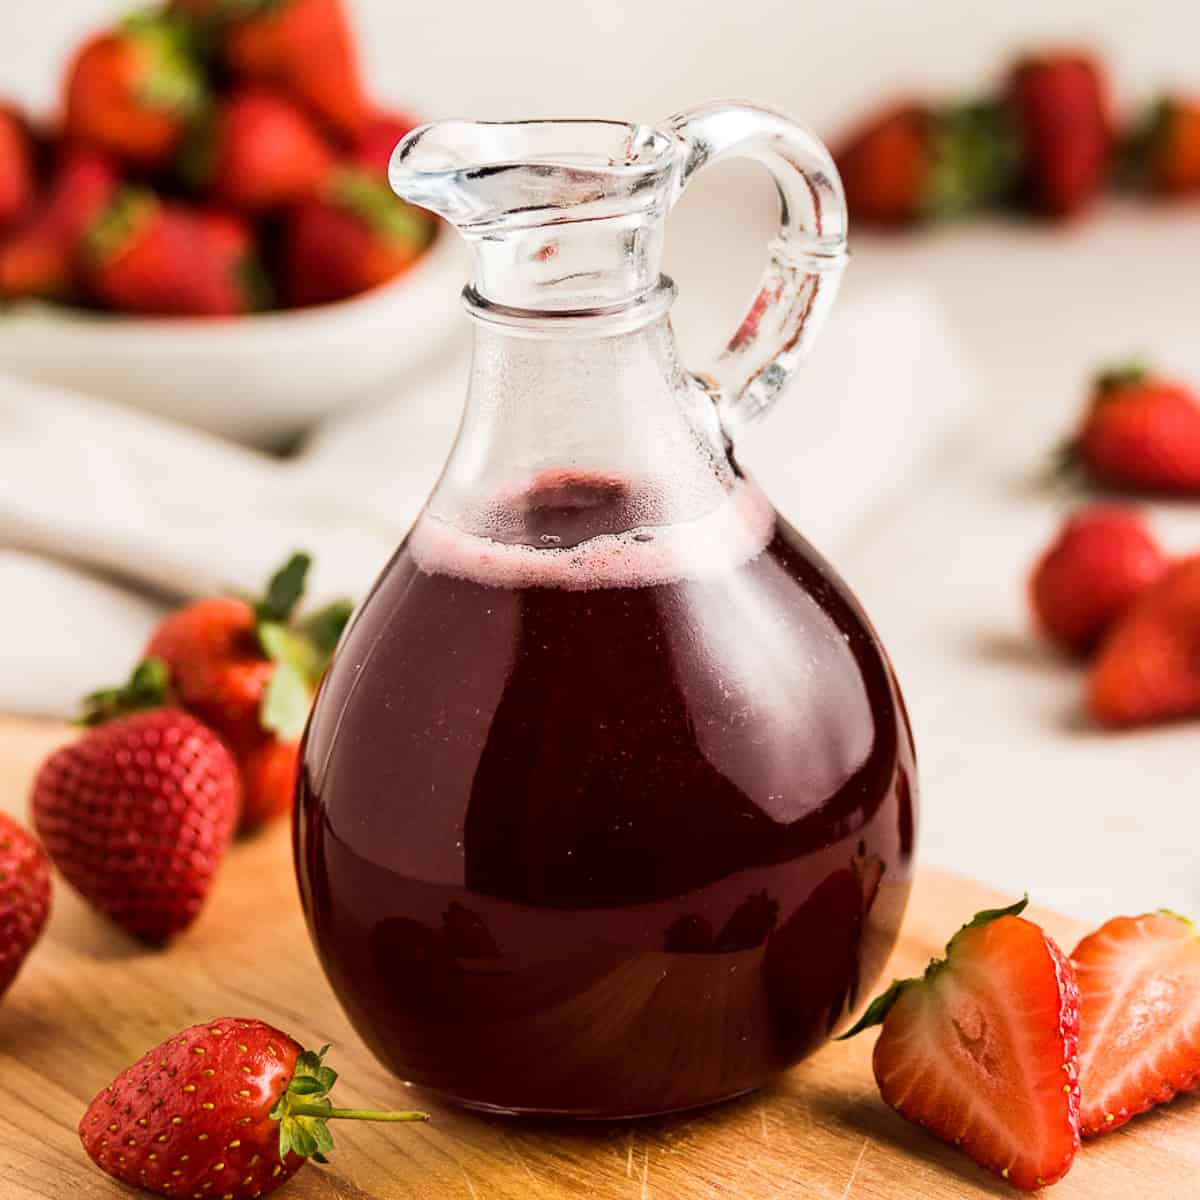 Strawberry simple syrup